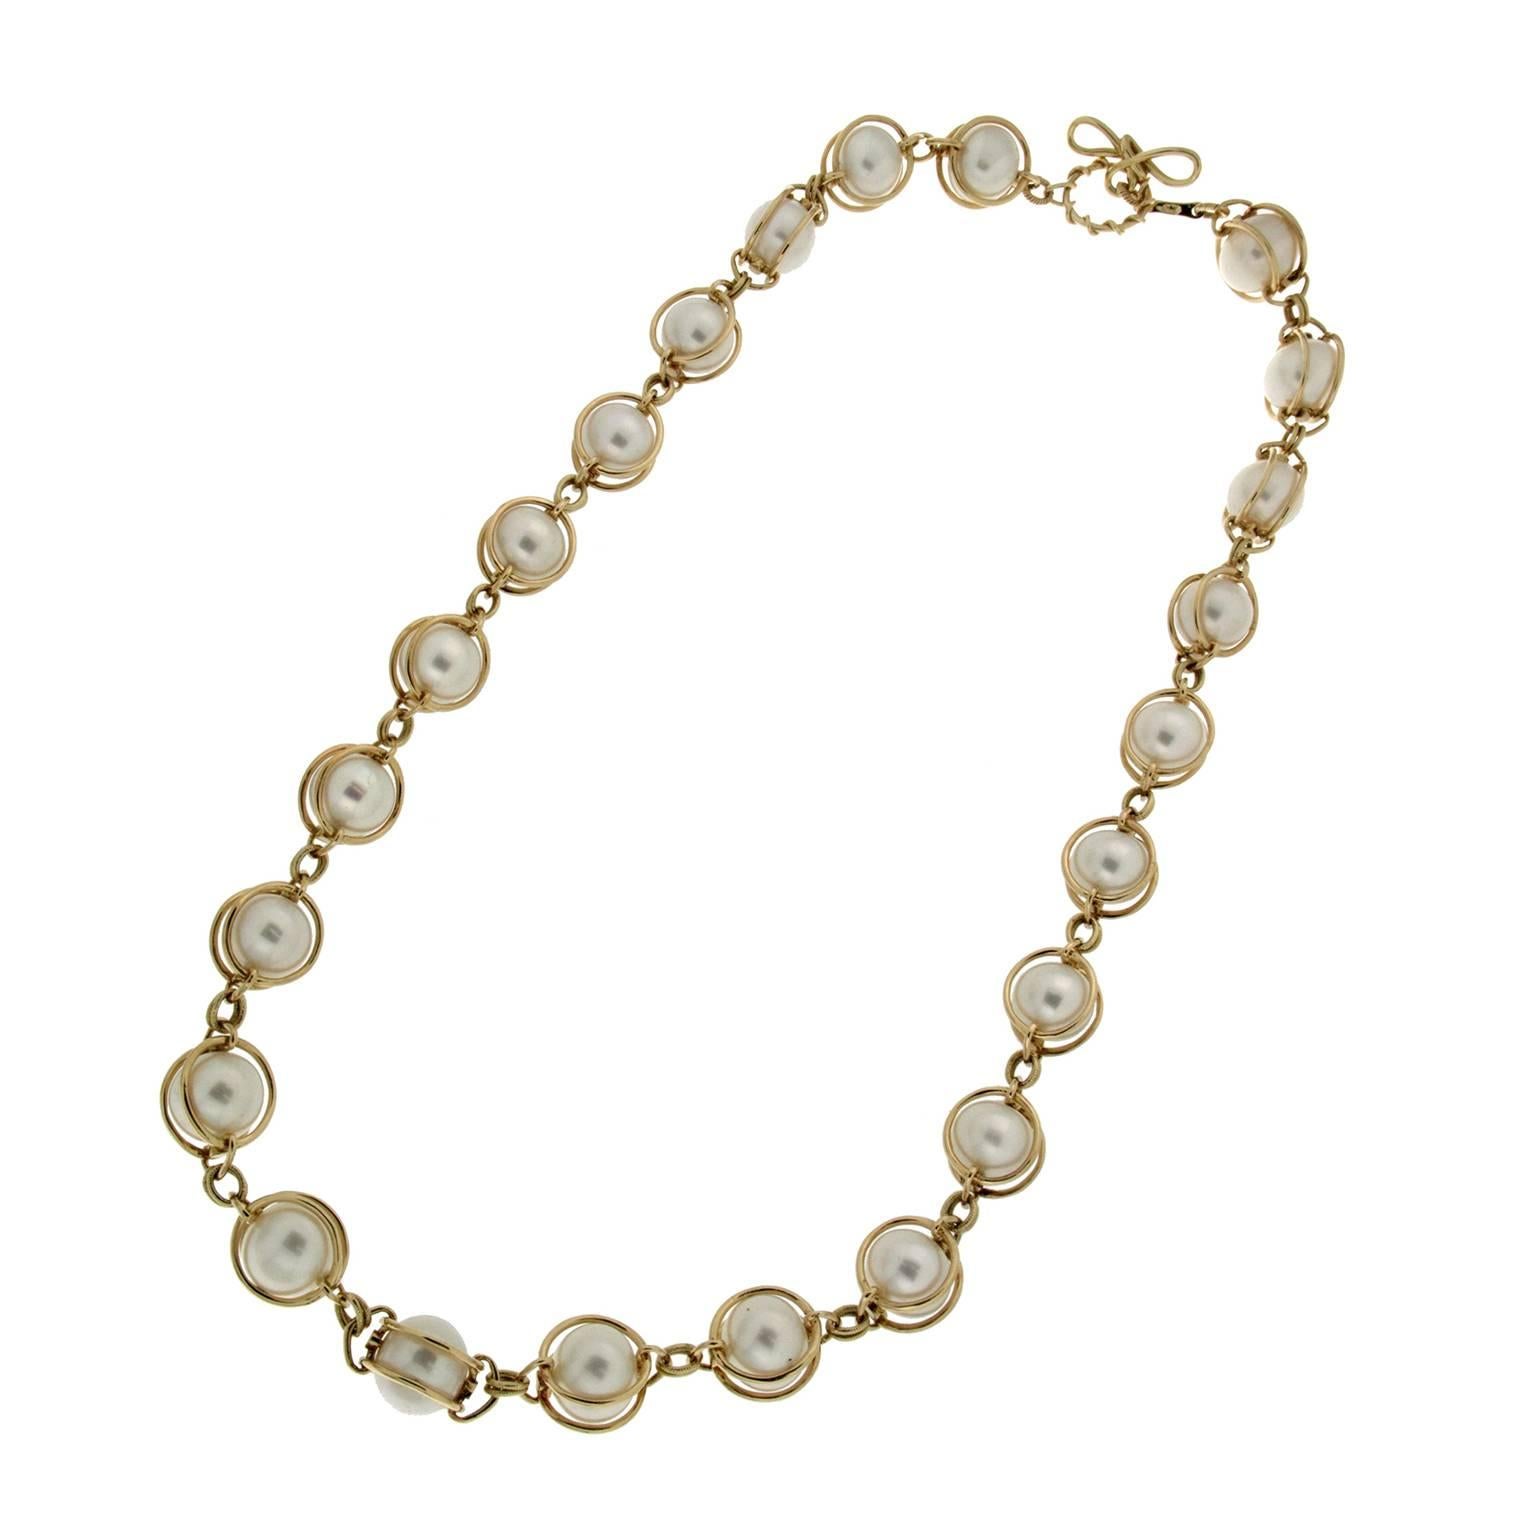 This necklace from the 'Doppio' collection features 21 smooth pearls, each pearl measures 12.5mm.  It is made in 18kt yellow gold and is finished with a Valentin Magro signature ring and toggle clasp.   Measurement detail - length 508 mm.